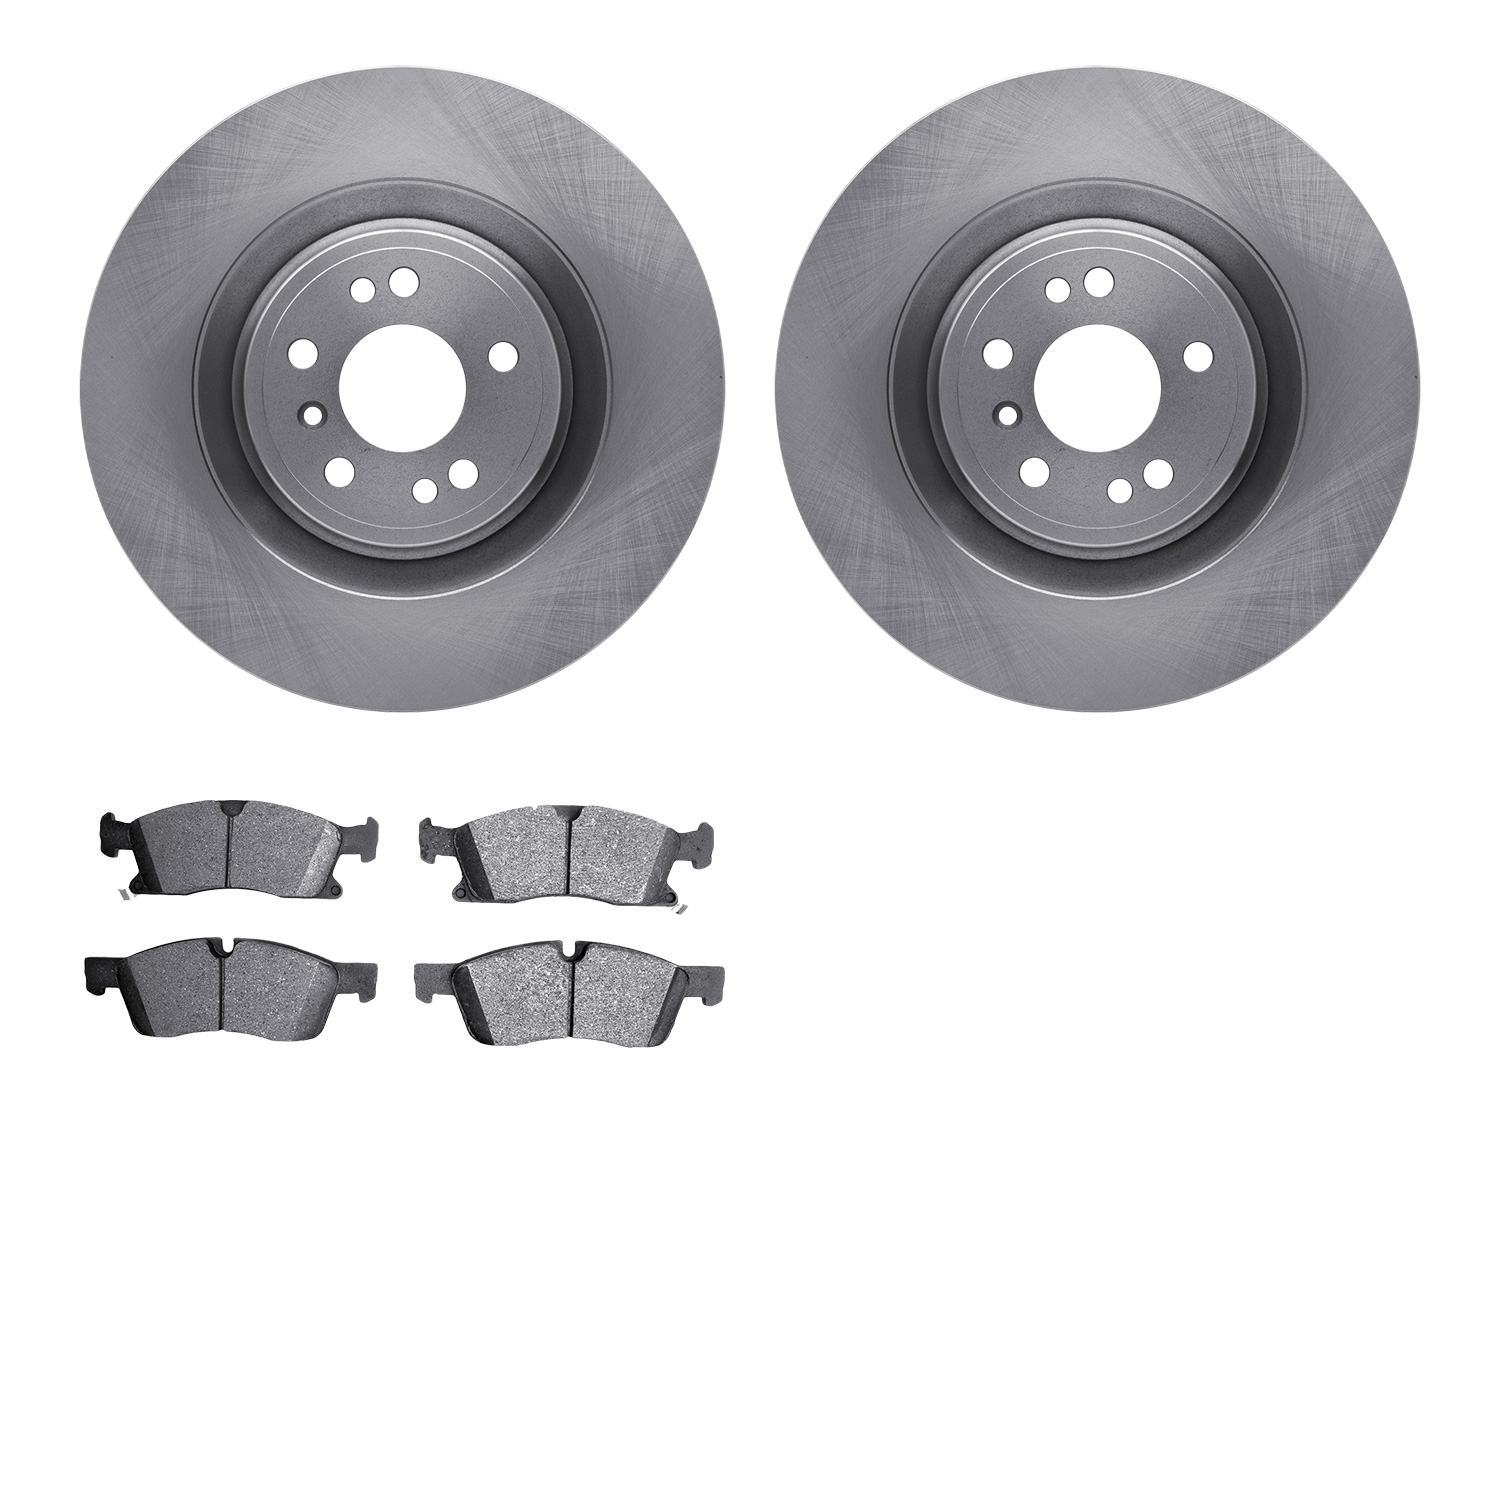 6402-63004 Brake Rotors with Ultimate-Duty Brake Pads, 2013-2019 Mercedes-Benz, Position: Front